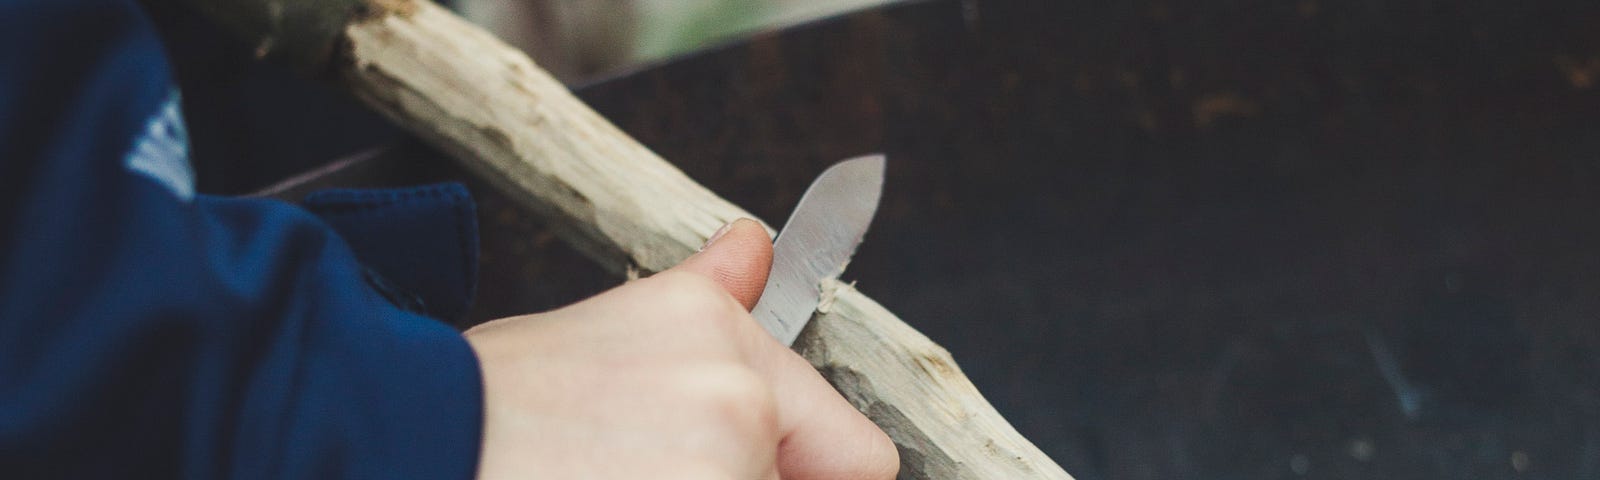 An image of someone holding a small knife with a sharp tip whittling off the bark of a wooden stick.